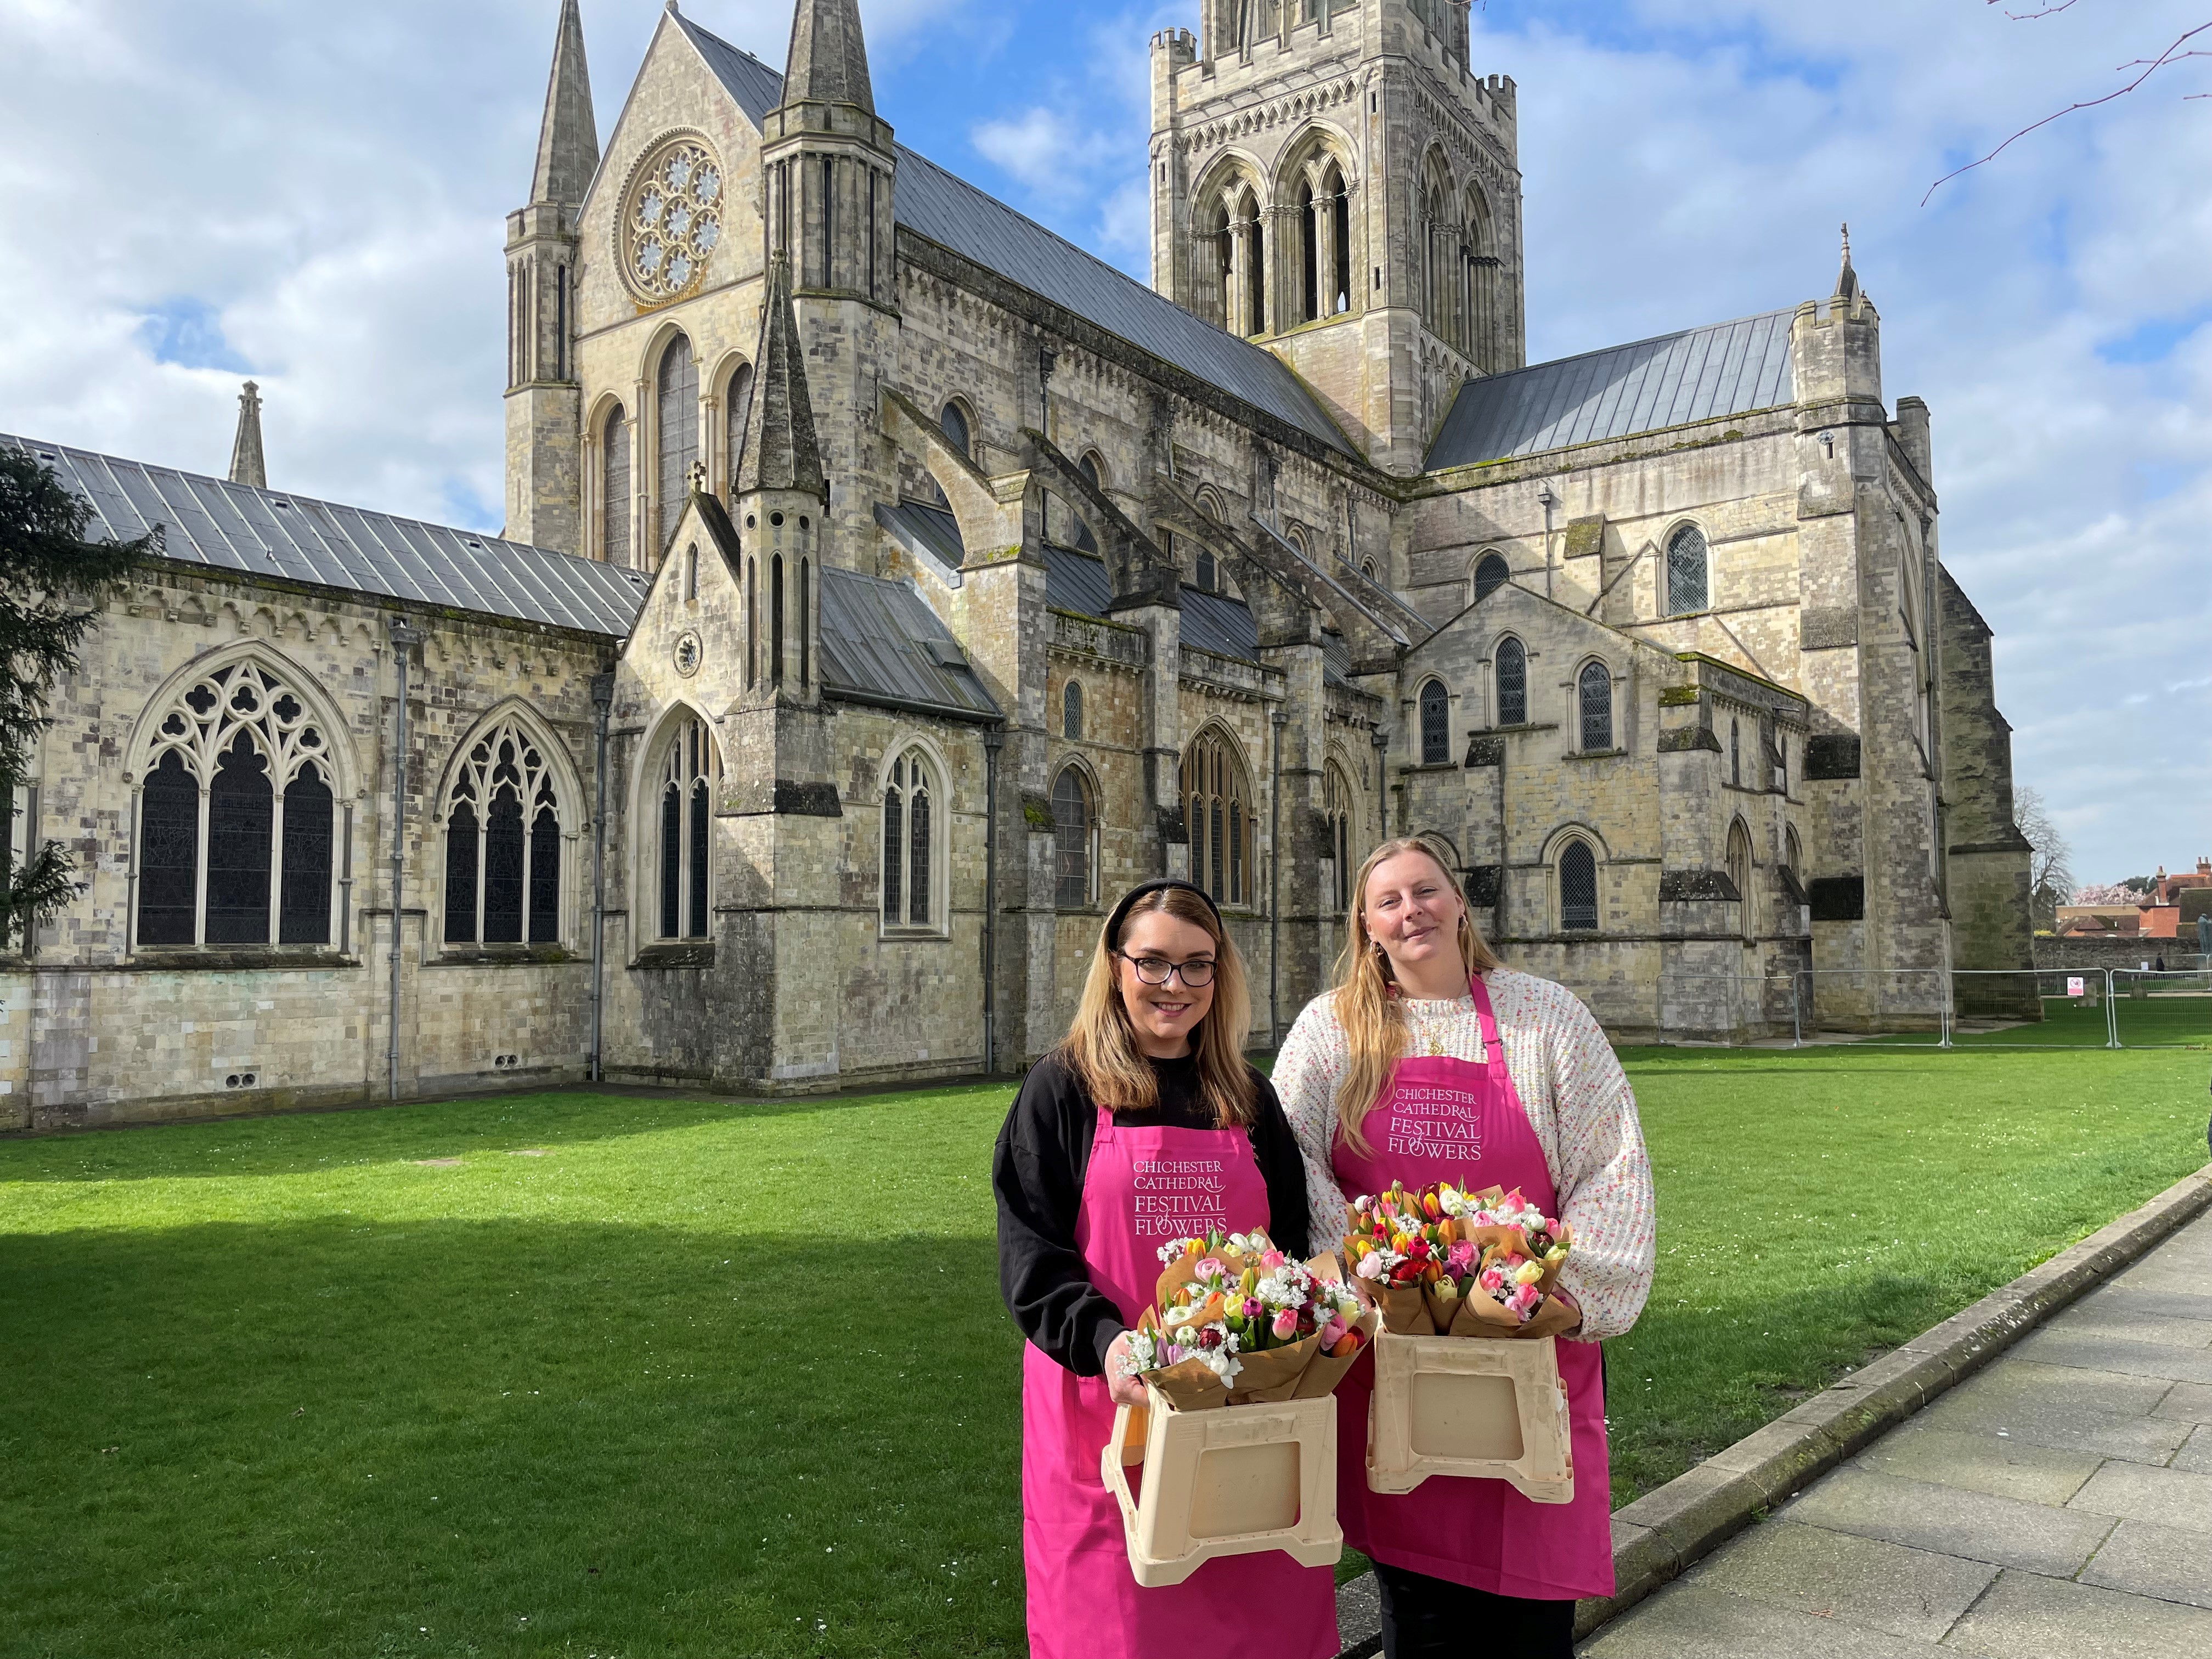 Hannah and Chantal, wearing bright pink aprons, stand in front of the historic grey stone Cathedral, surrounded by green grass. They are holding colourful bunches of flowers.